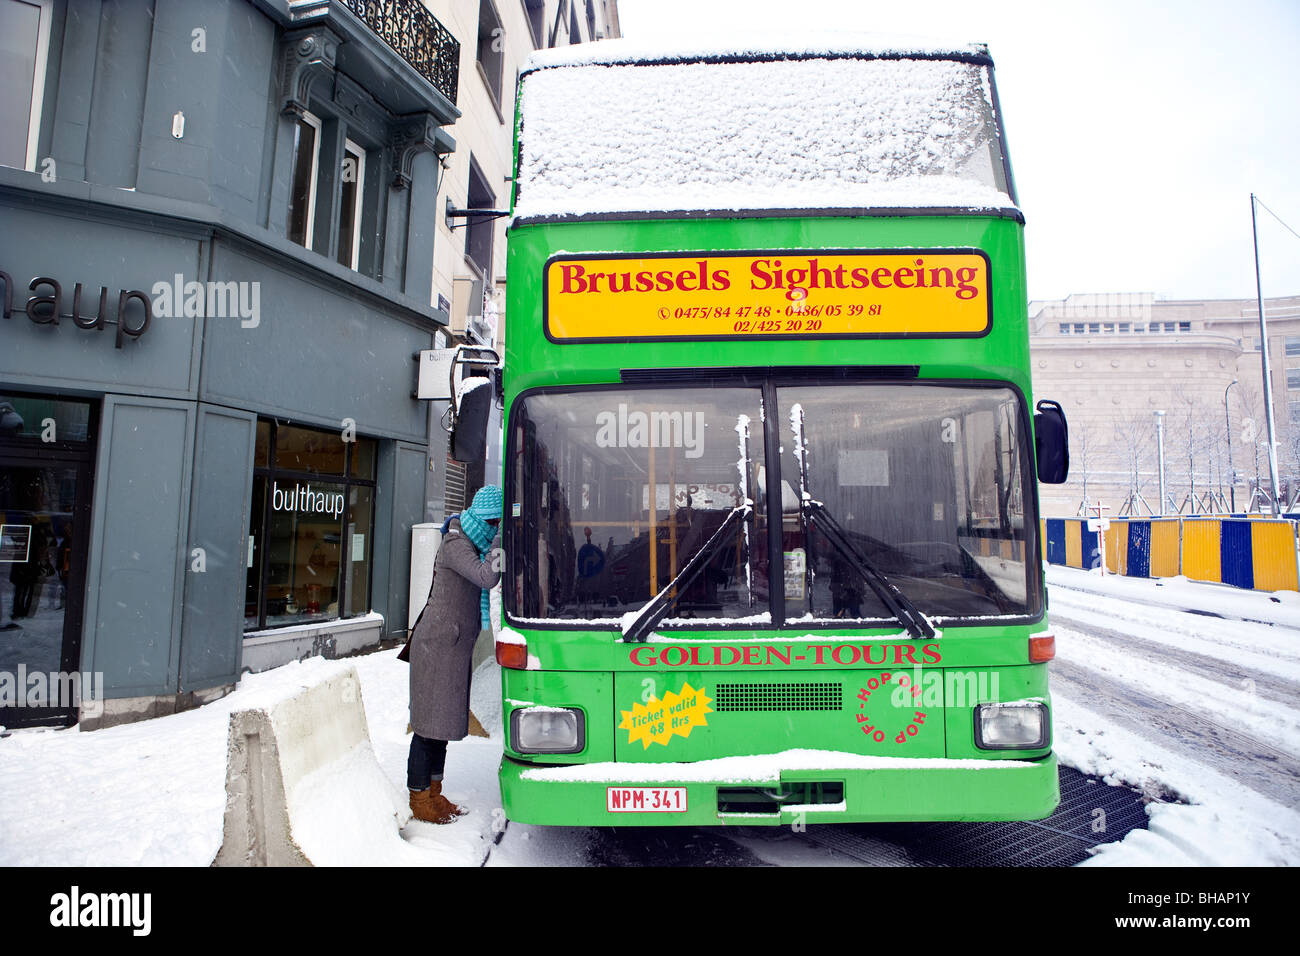 Brussels Sightseeing Bus Out Of Service Due To Bad Weather Stock Photo